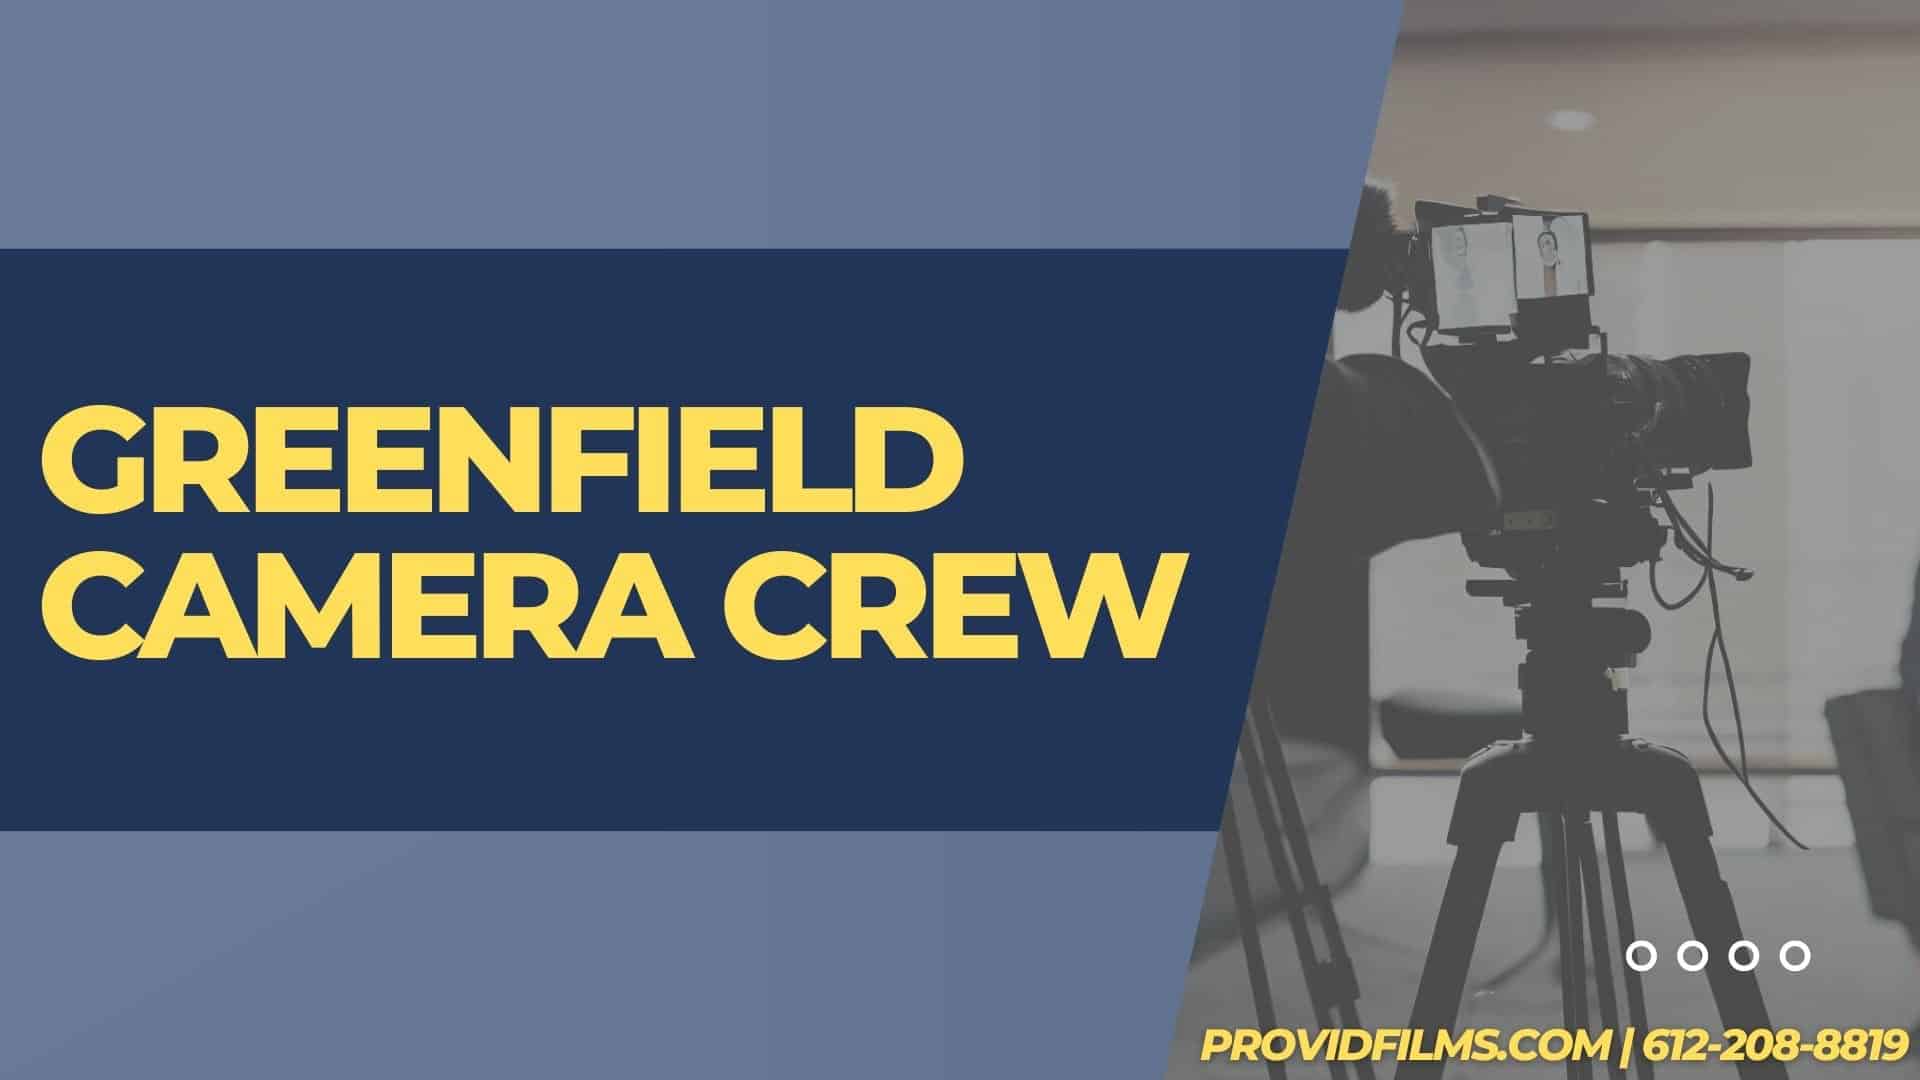 Graphic of a video camera with the text saying "Greenfield Camera Crew"